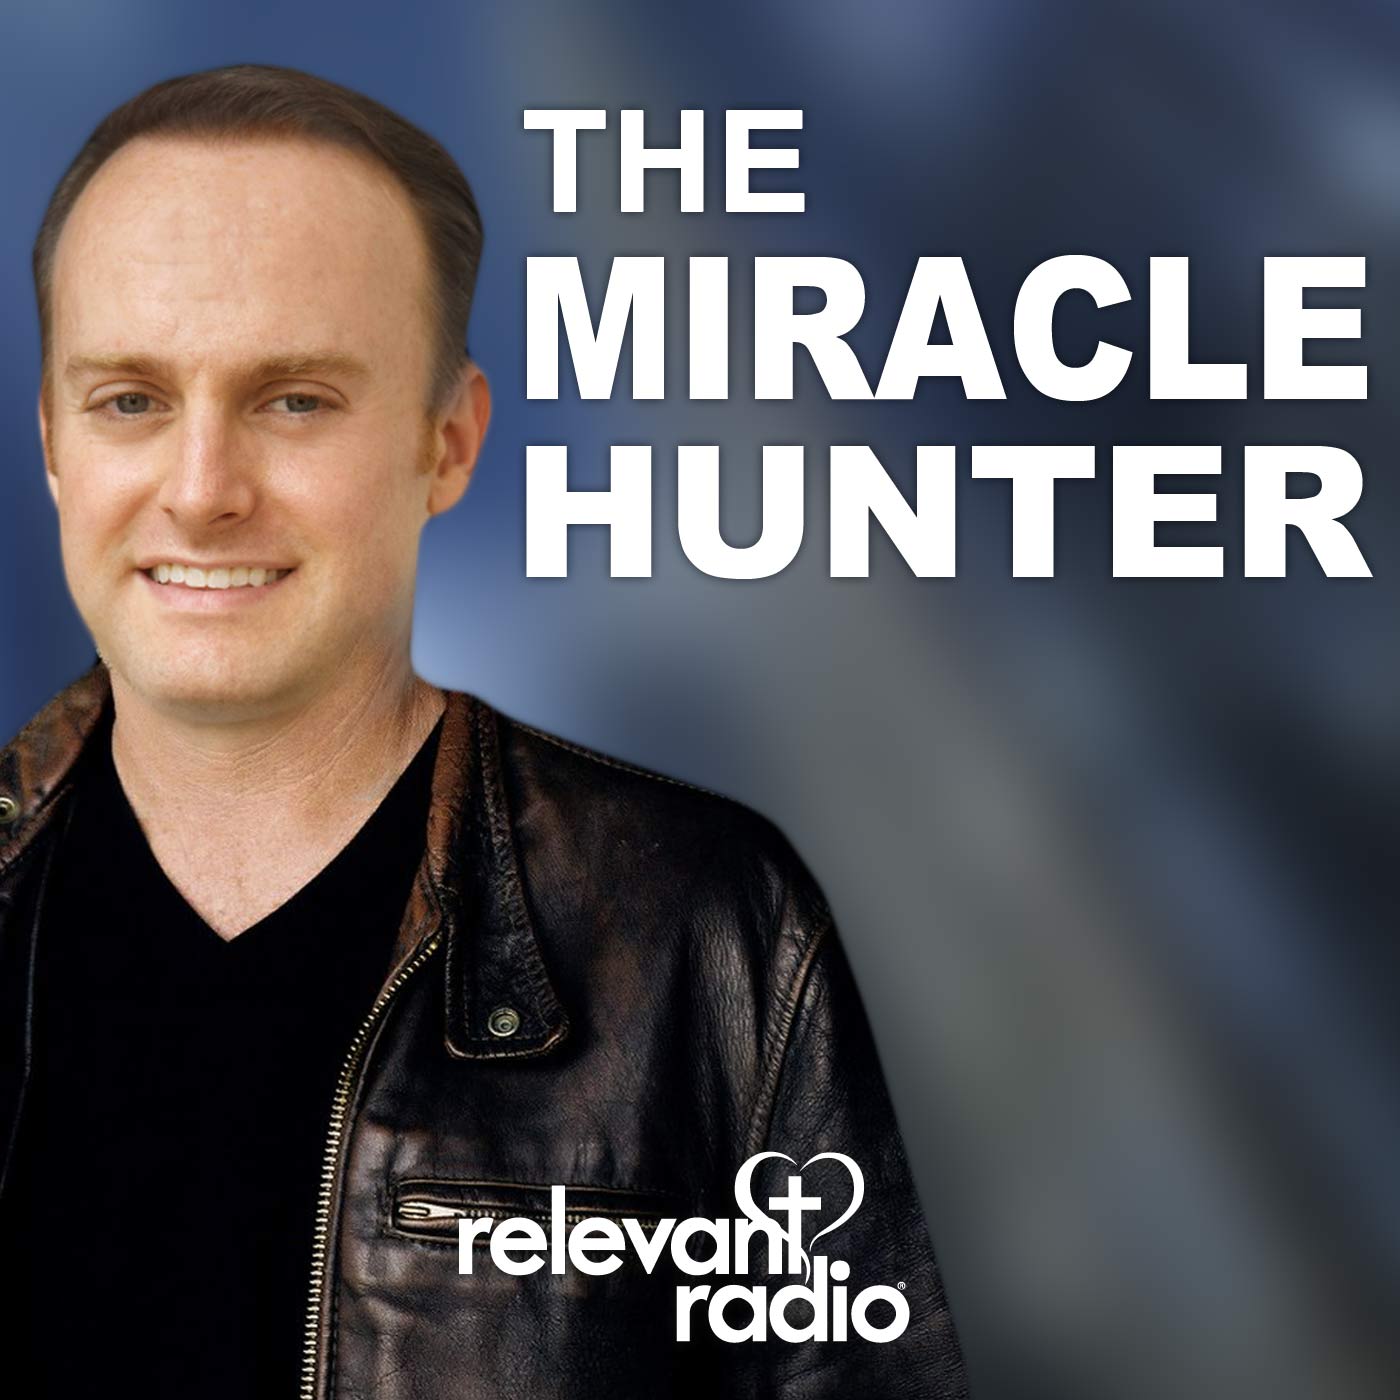 The Miracle Hunter – Relevant Radio